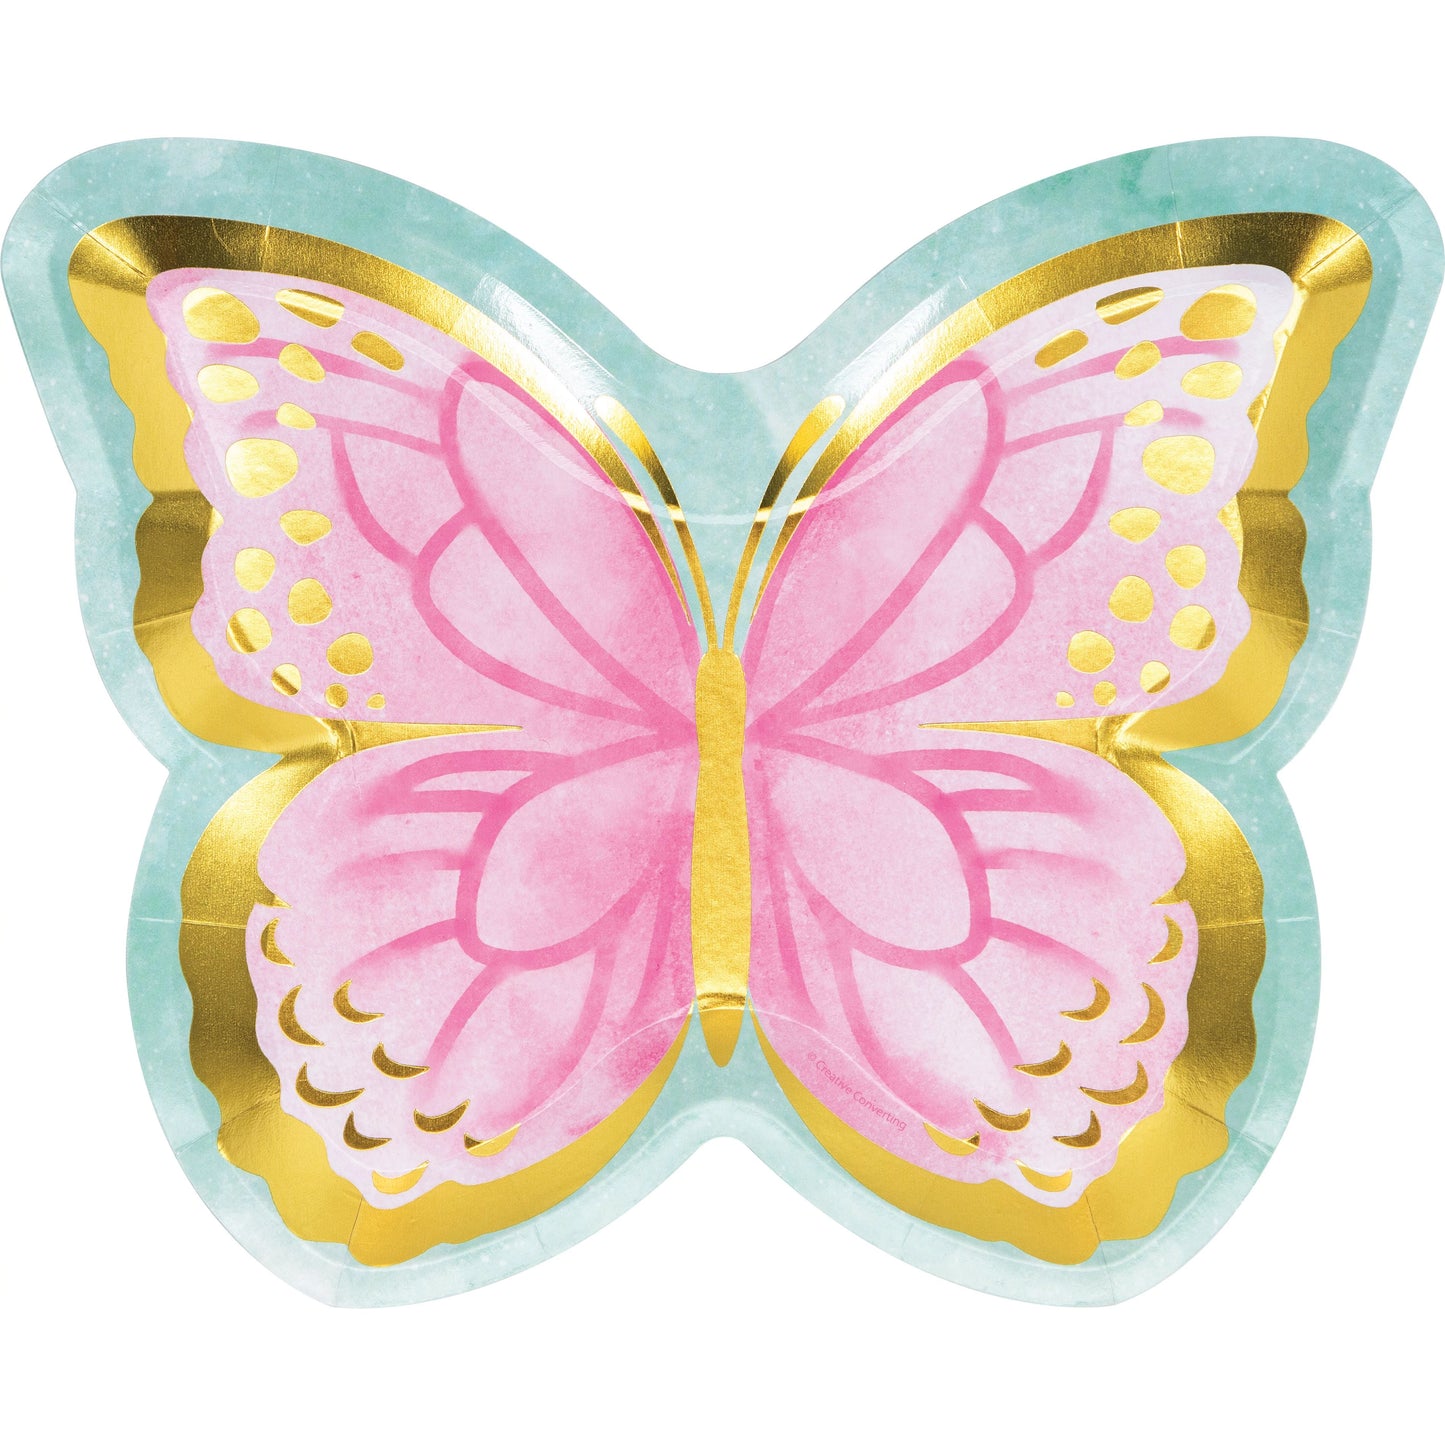 Lunch Plates: Butterflies - Butterfly Shimmer 8ct